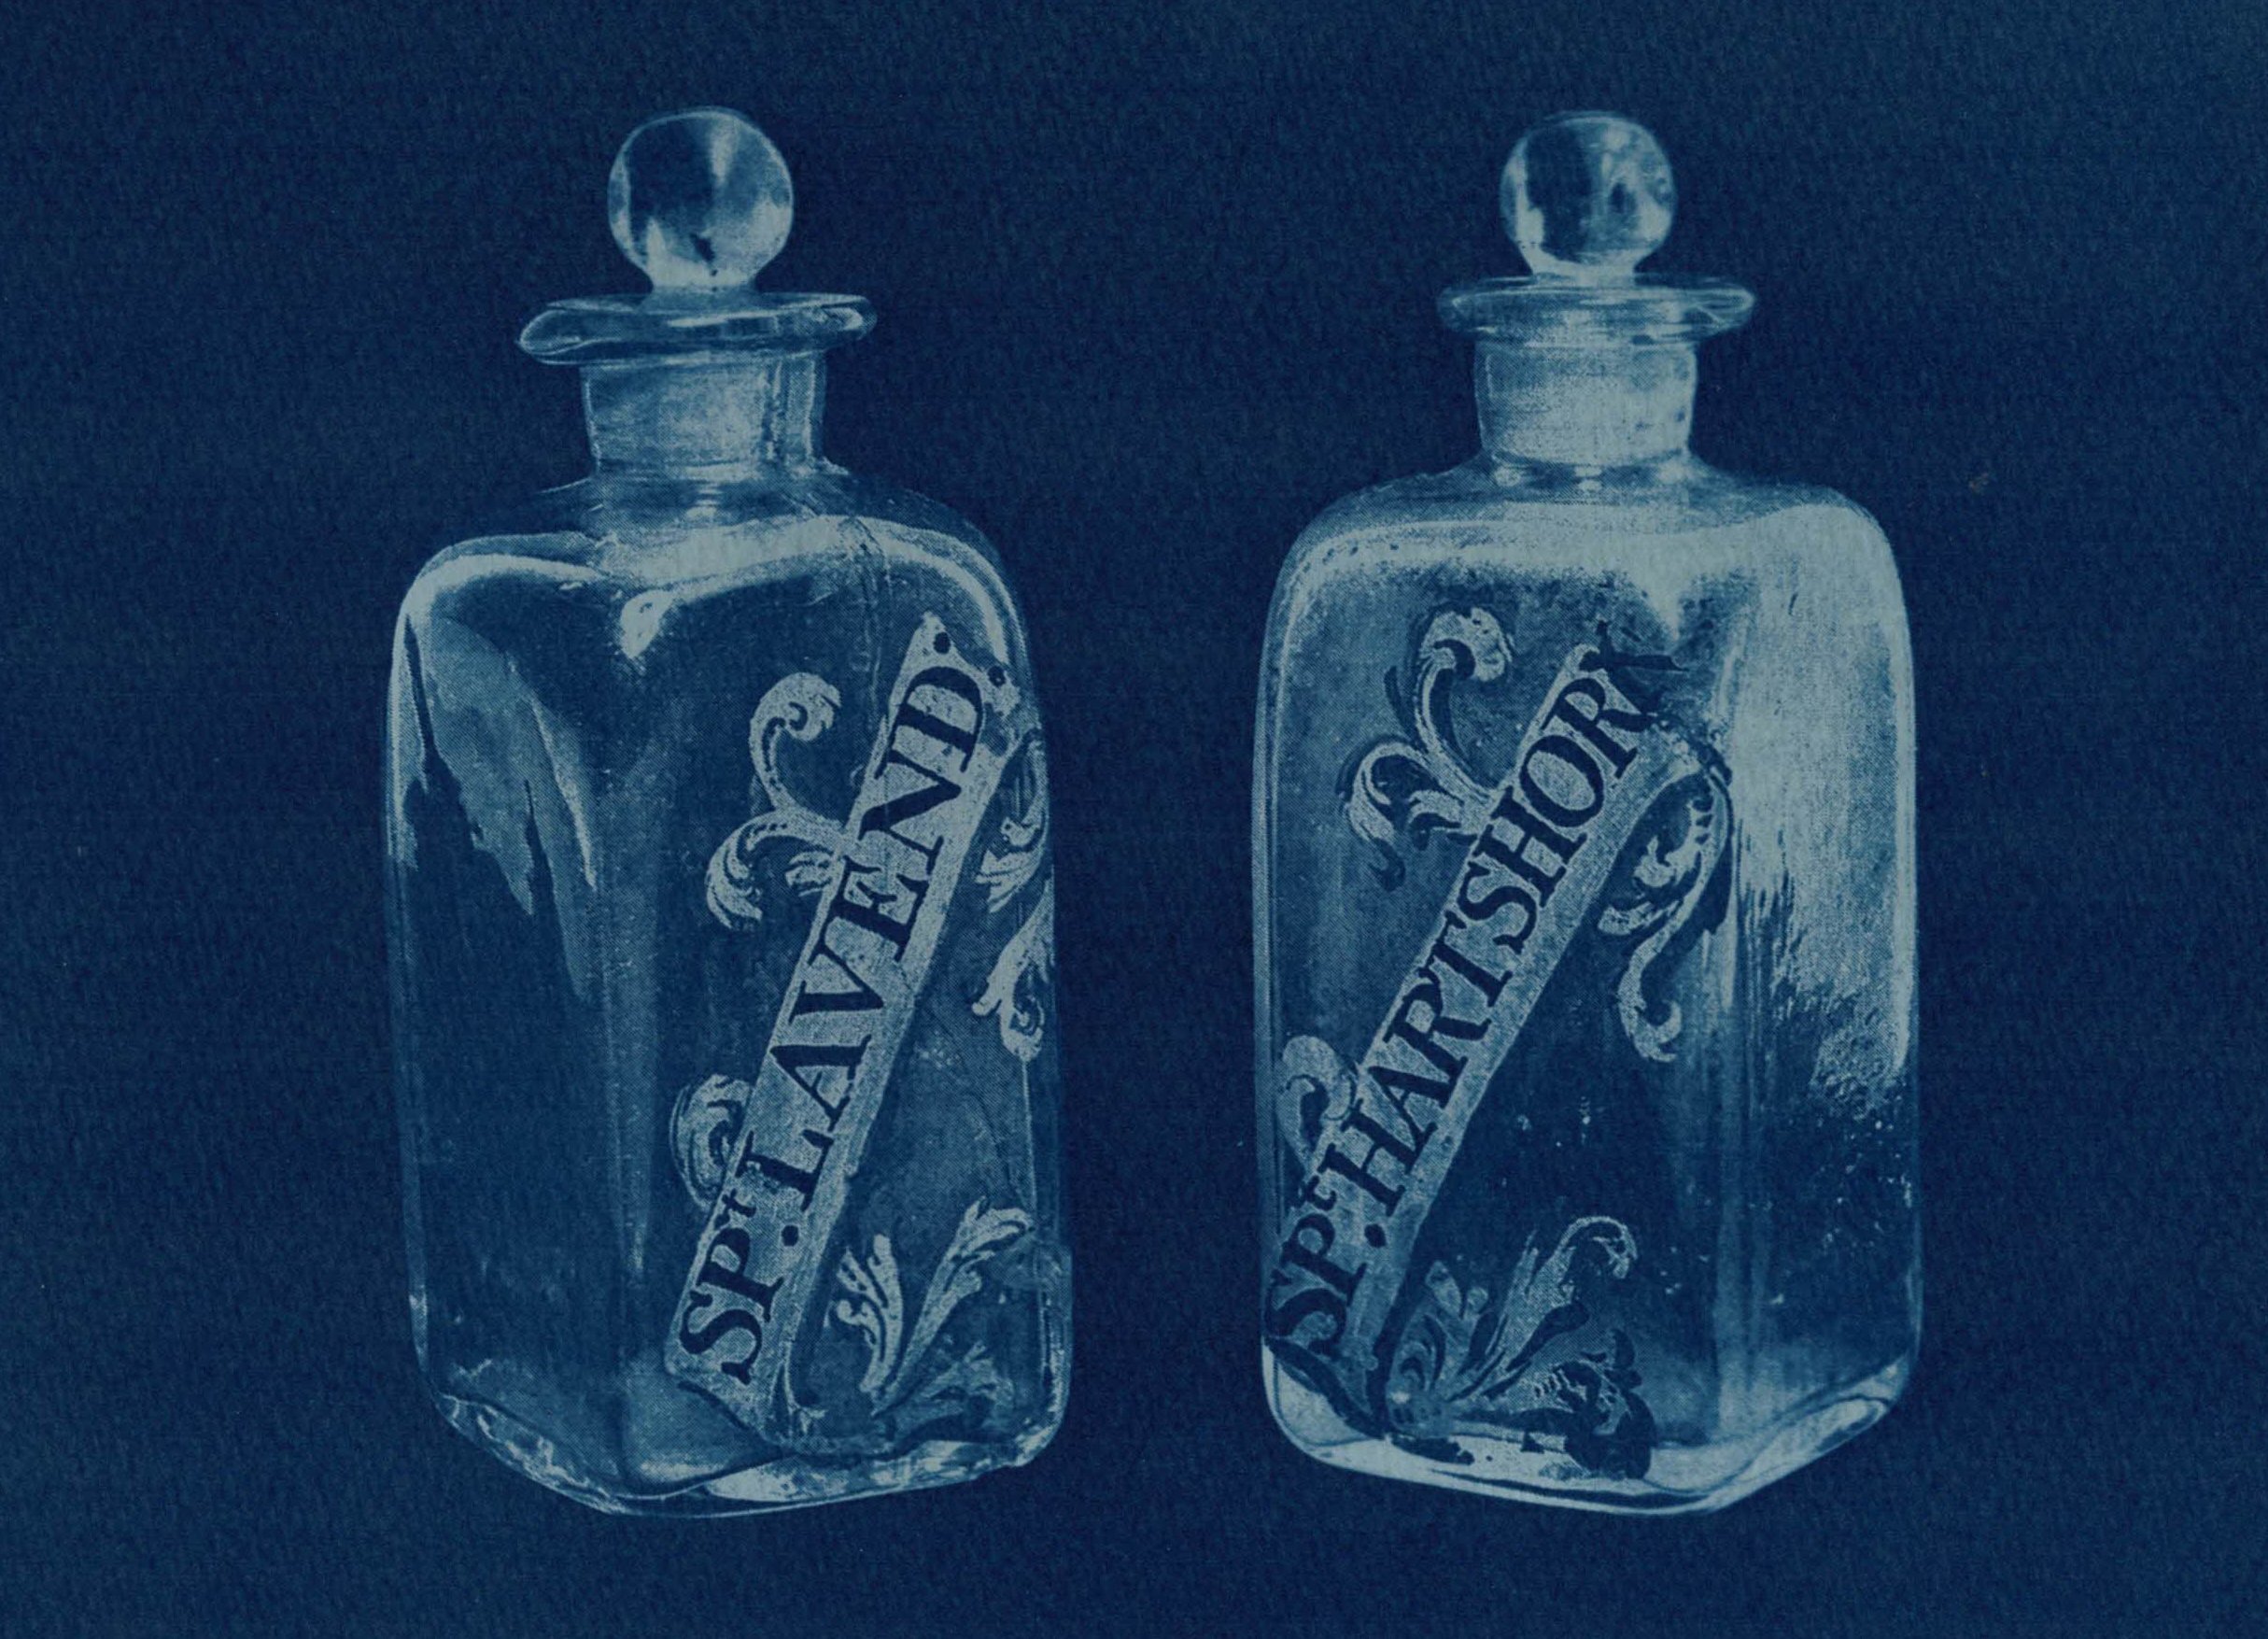 Marge_Bradshaw_Photography_Cyanotype using Wellcome Collection wo Glass Bottles, marked SPt. LAVEND and SPt HARTSHORX.jpg